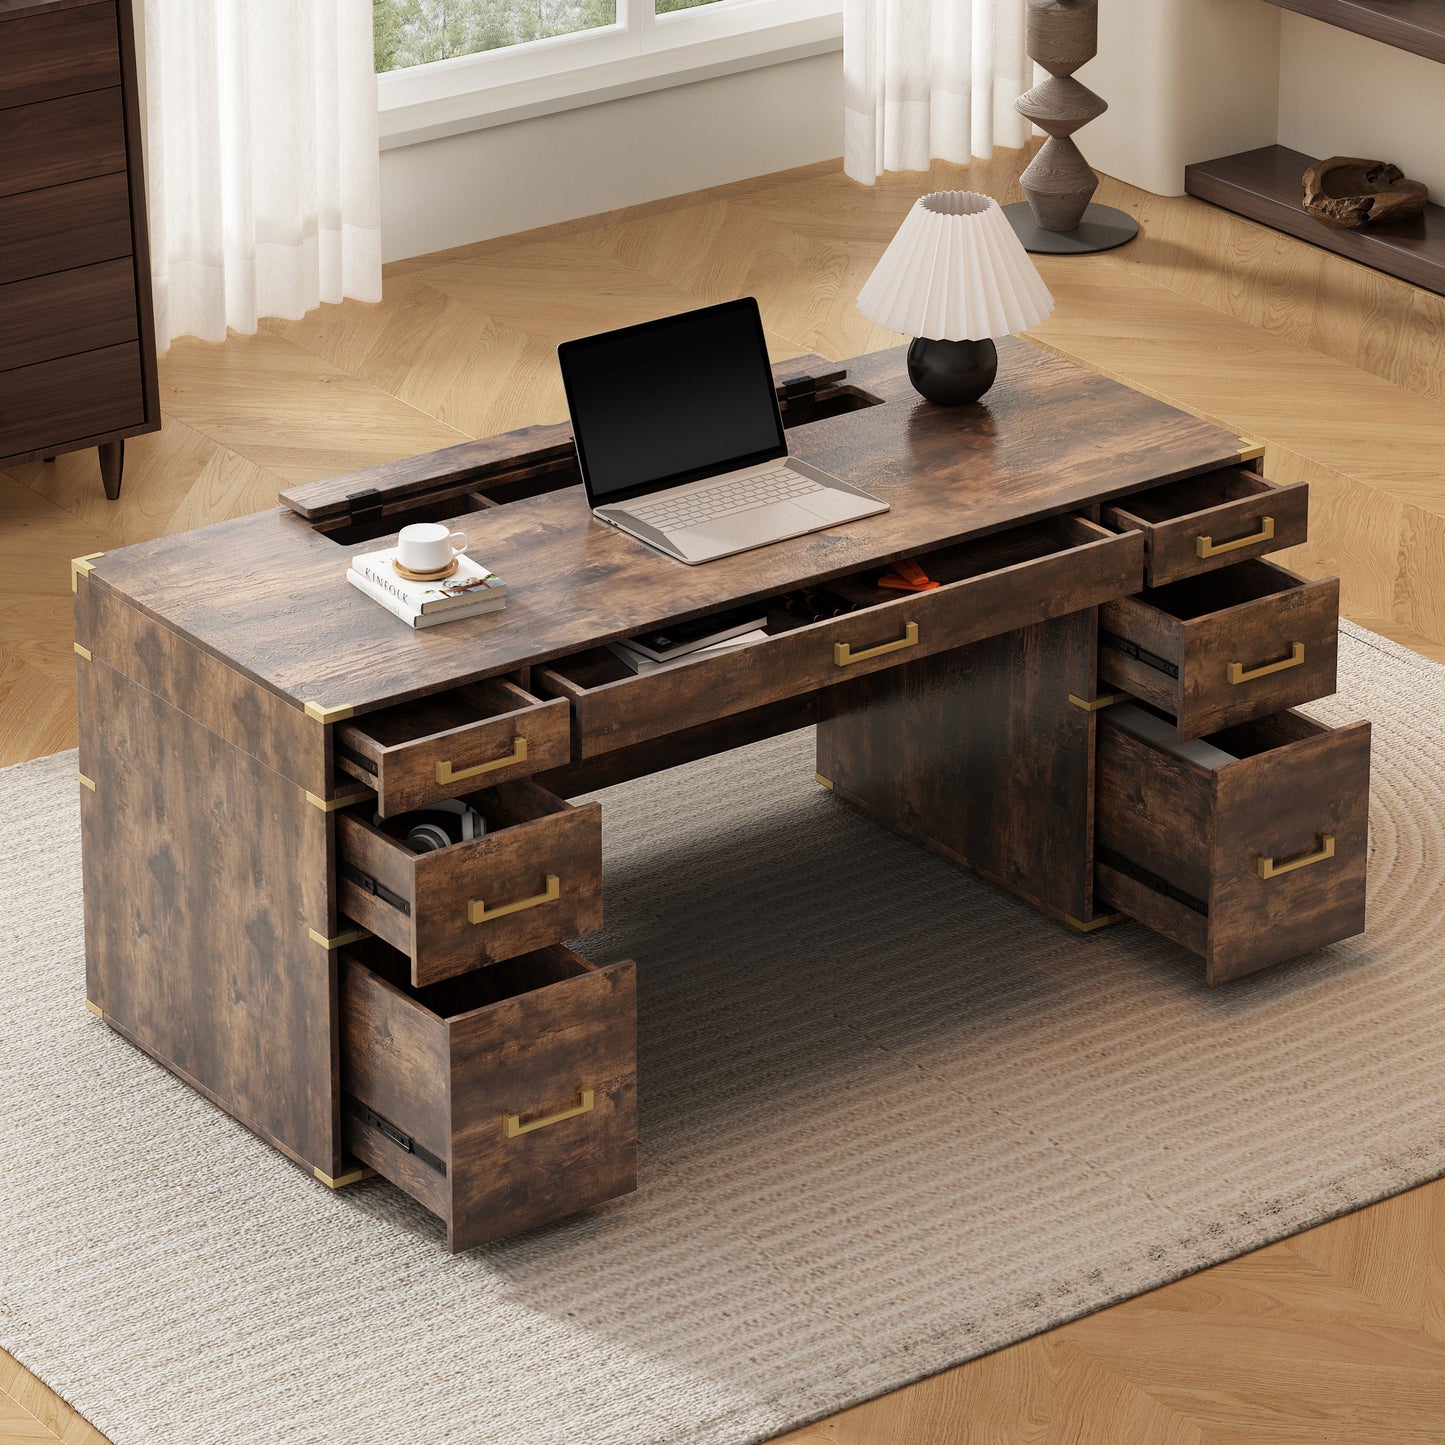 Executive Desk Metal Edge with 2 file drawers, USB Ports and Outlets